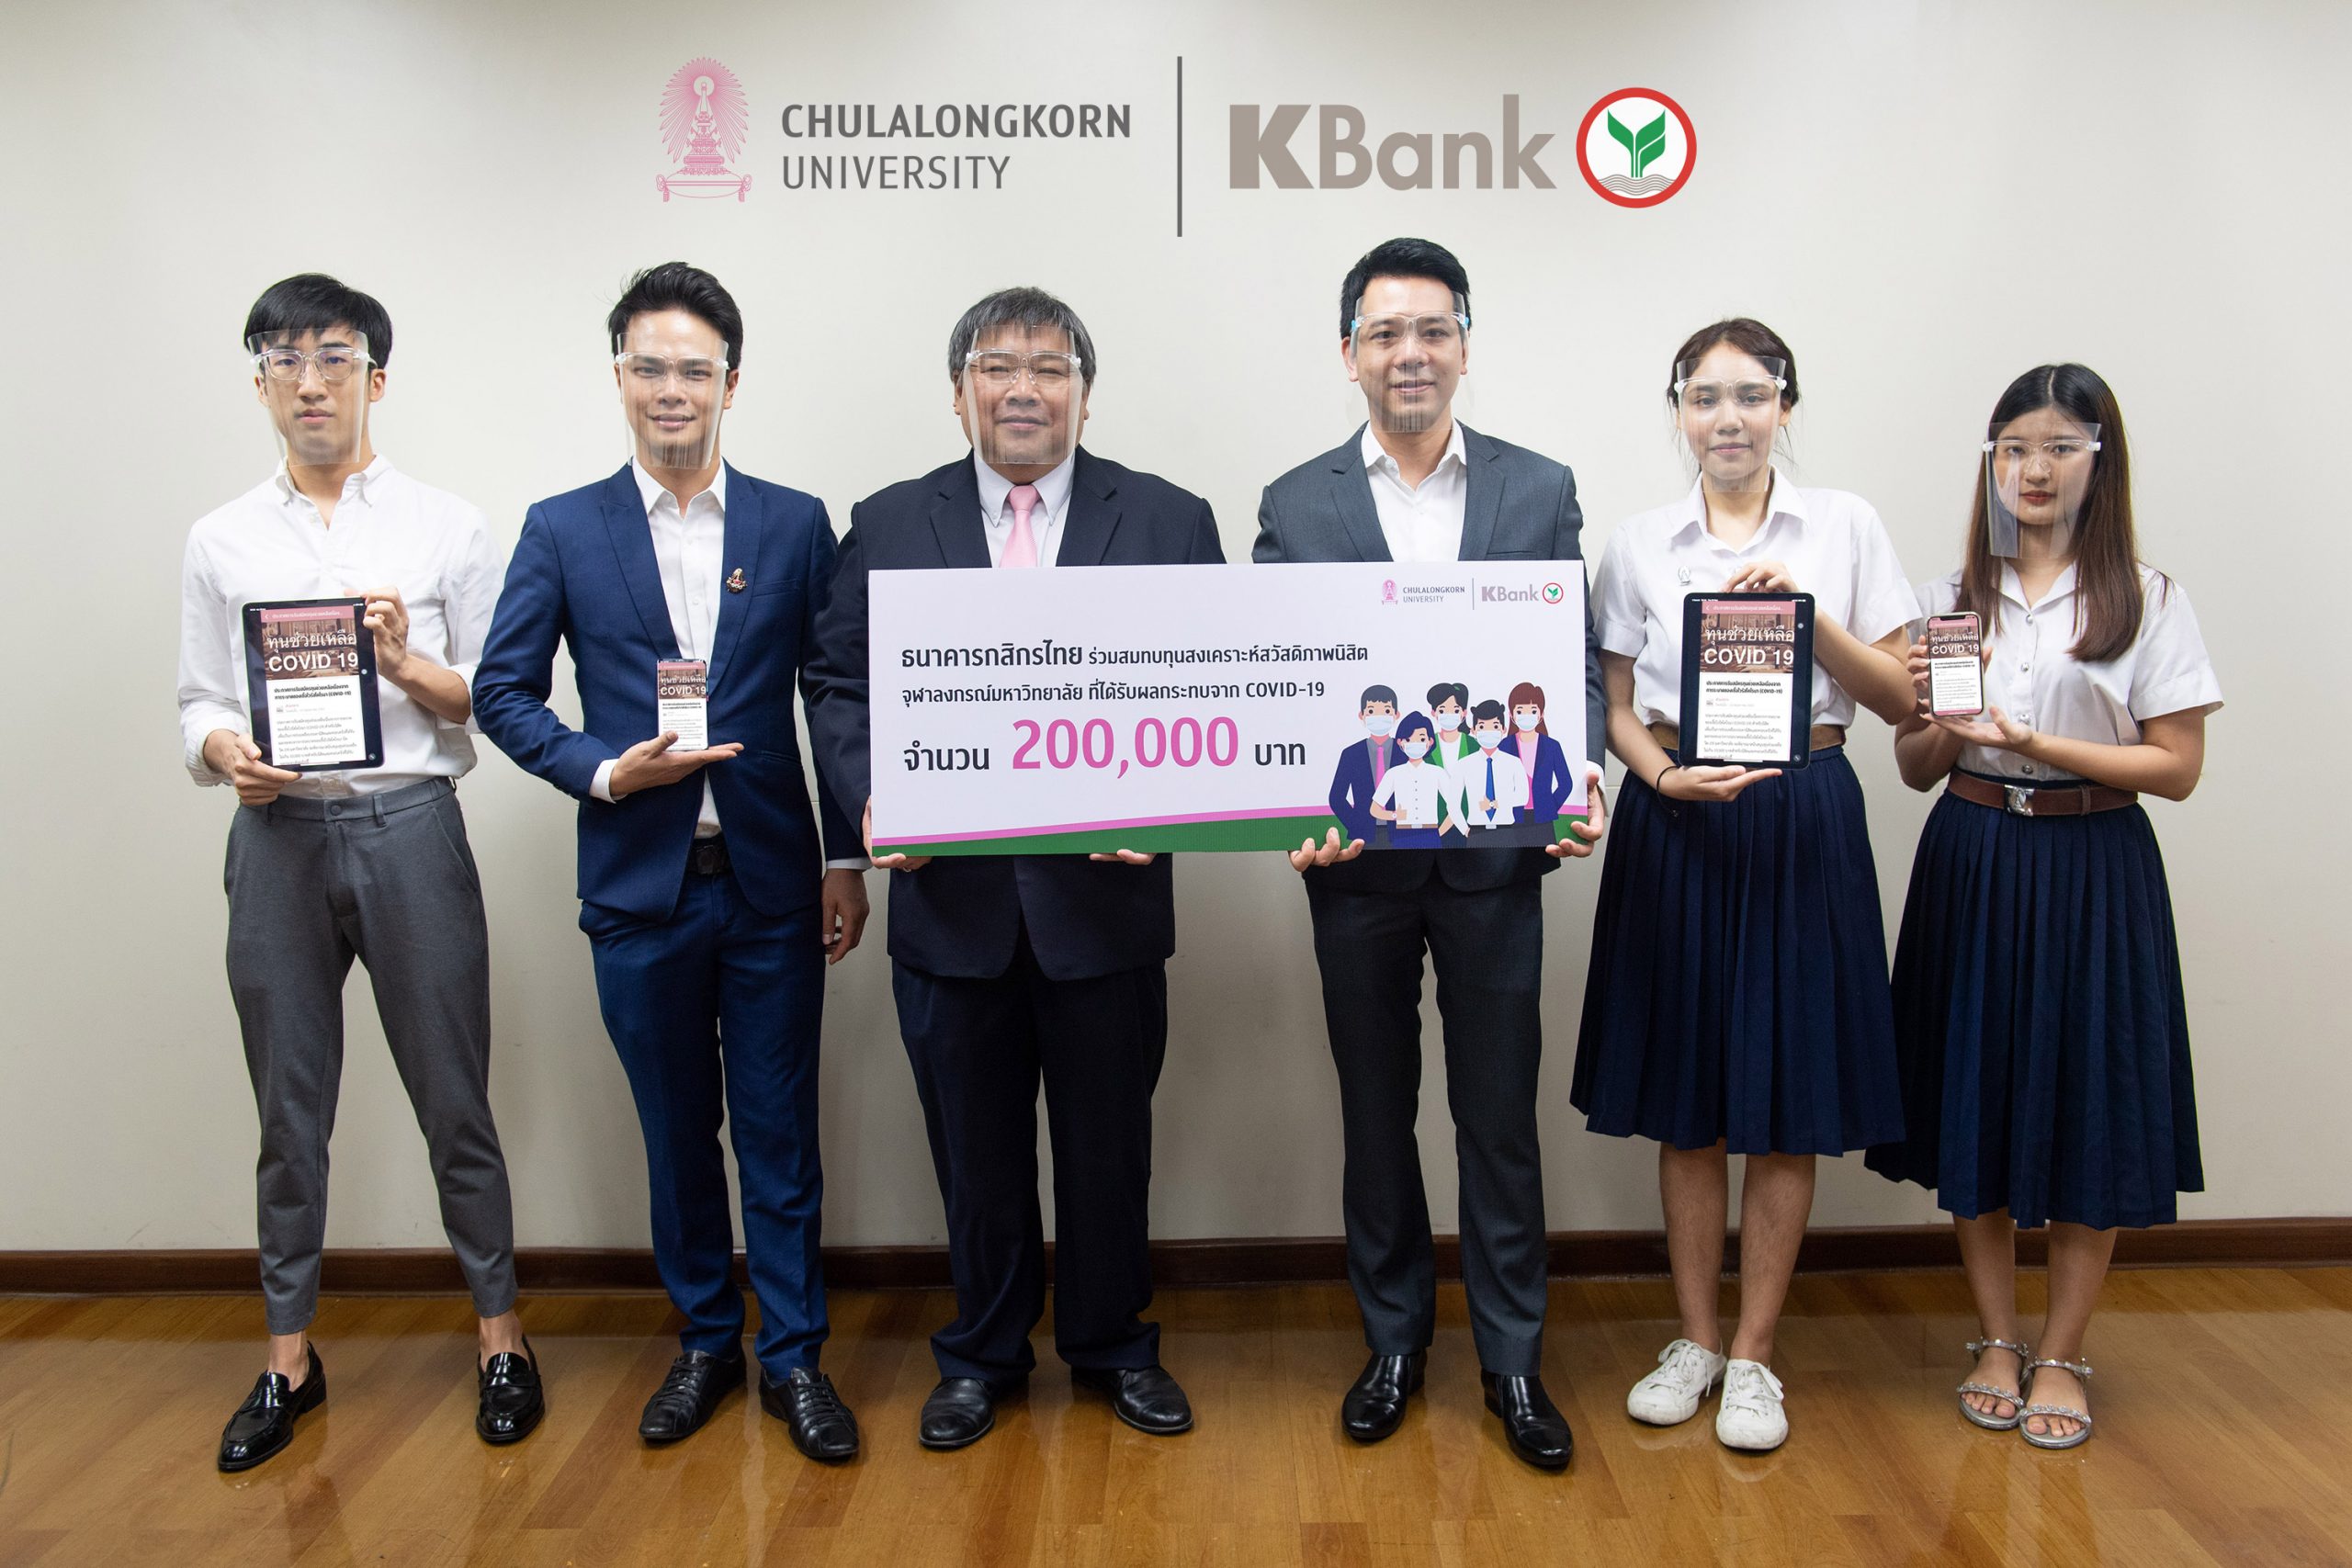 Photo Release: KBank donates money to support the welfare of CUs students affected by COVID-19 pandemic